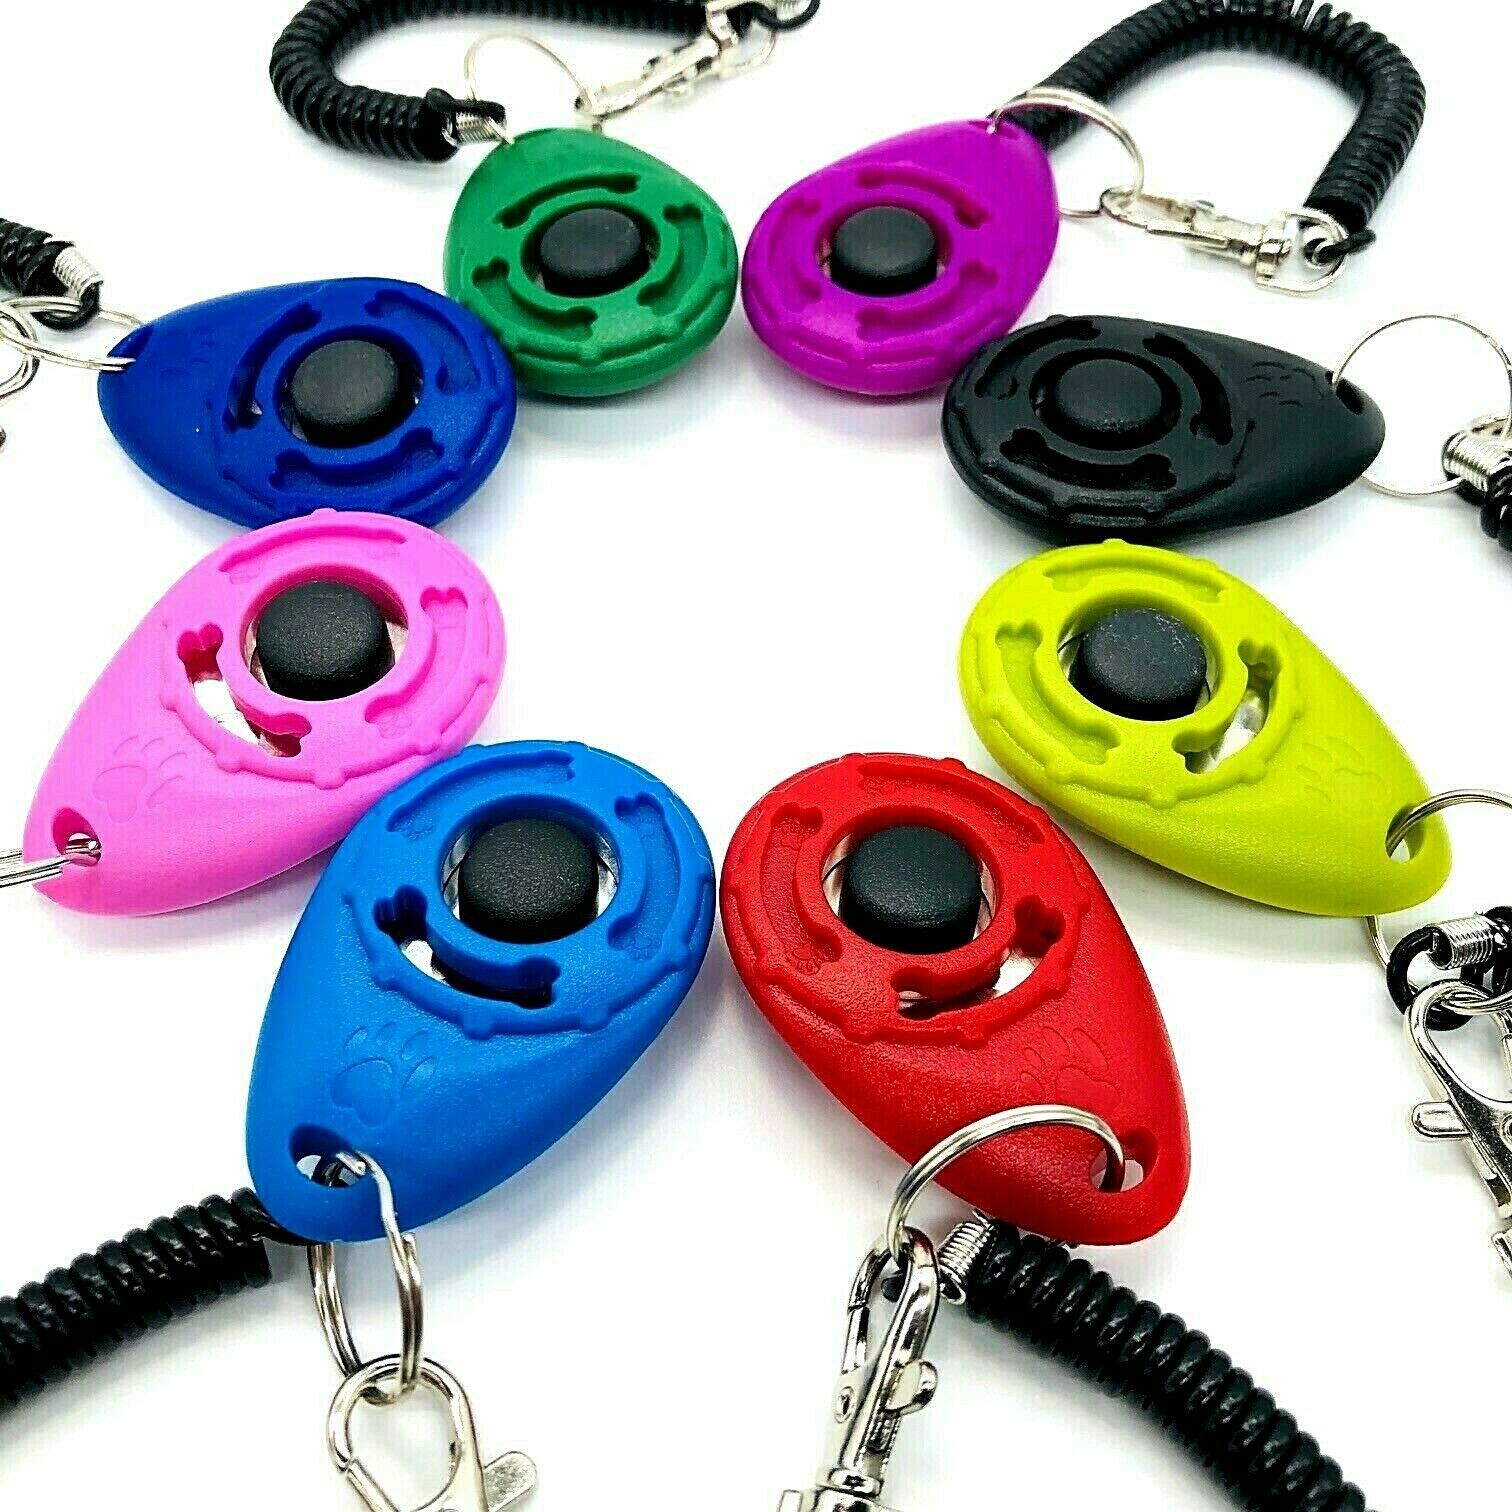 Puppy Dog Pet Training Clicker With Wrist Strap Obedience Train New Colors!